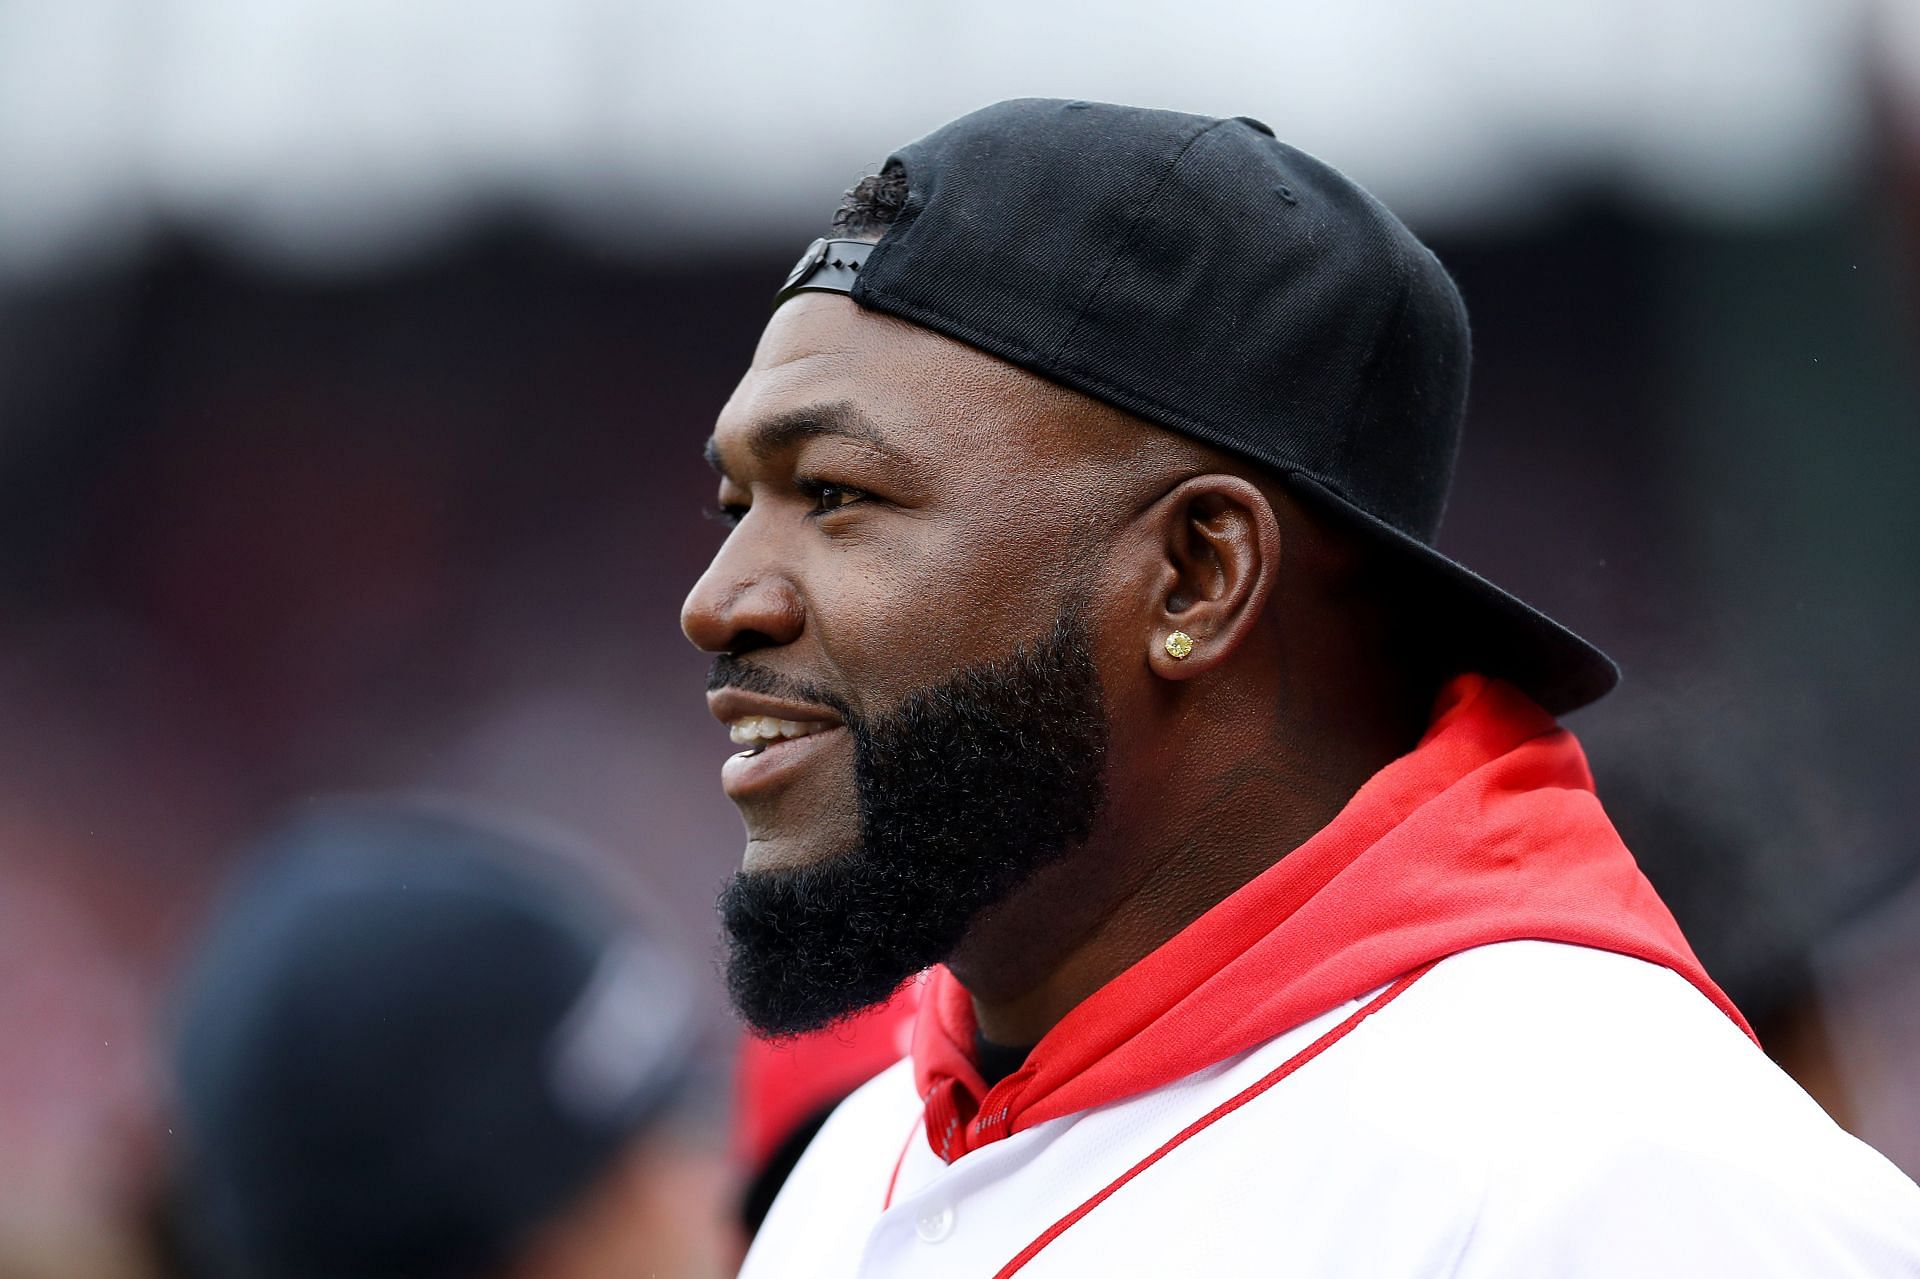 Former Boston Red Sox slugger David Ortiz hates the rumors about Xander Bogaerts being traded.